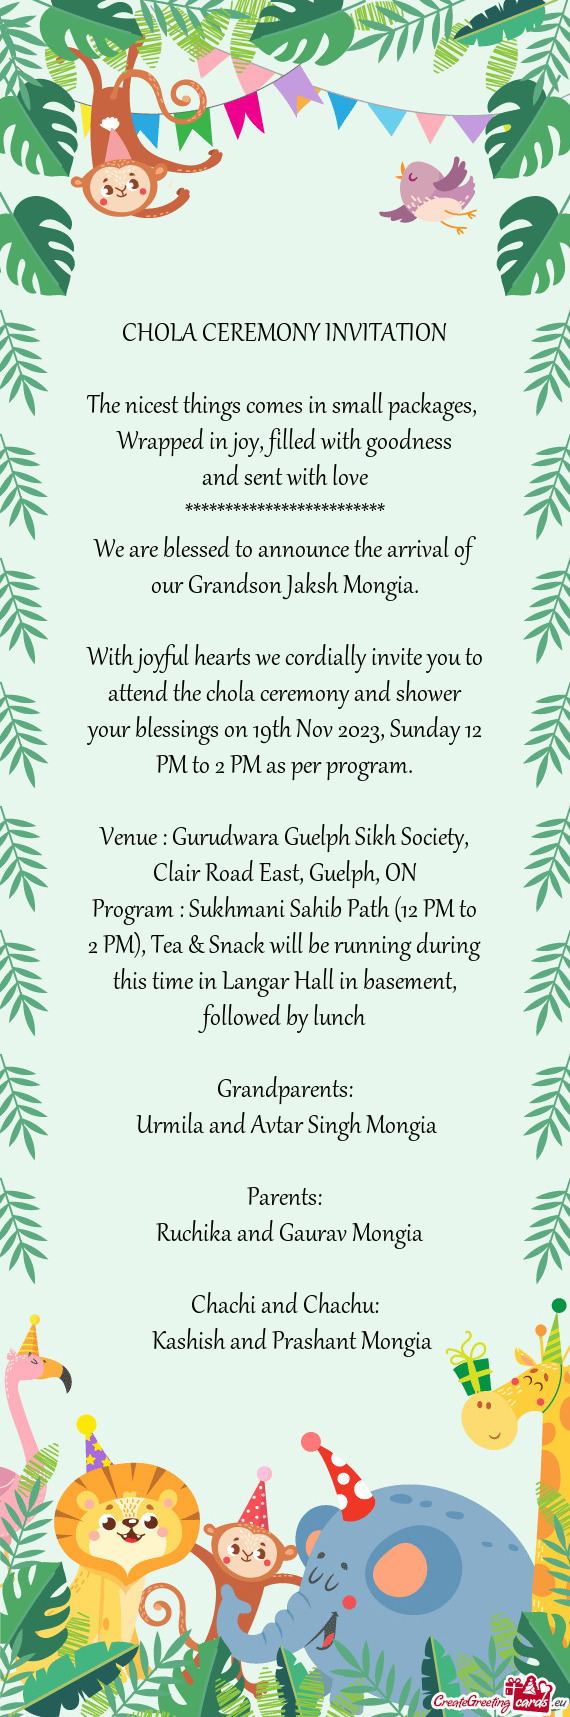 Program : Sukhmani Sahib Path (12 PM to 2 PM), Tea & Snack will be running during this time in Langa